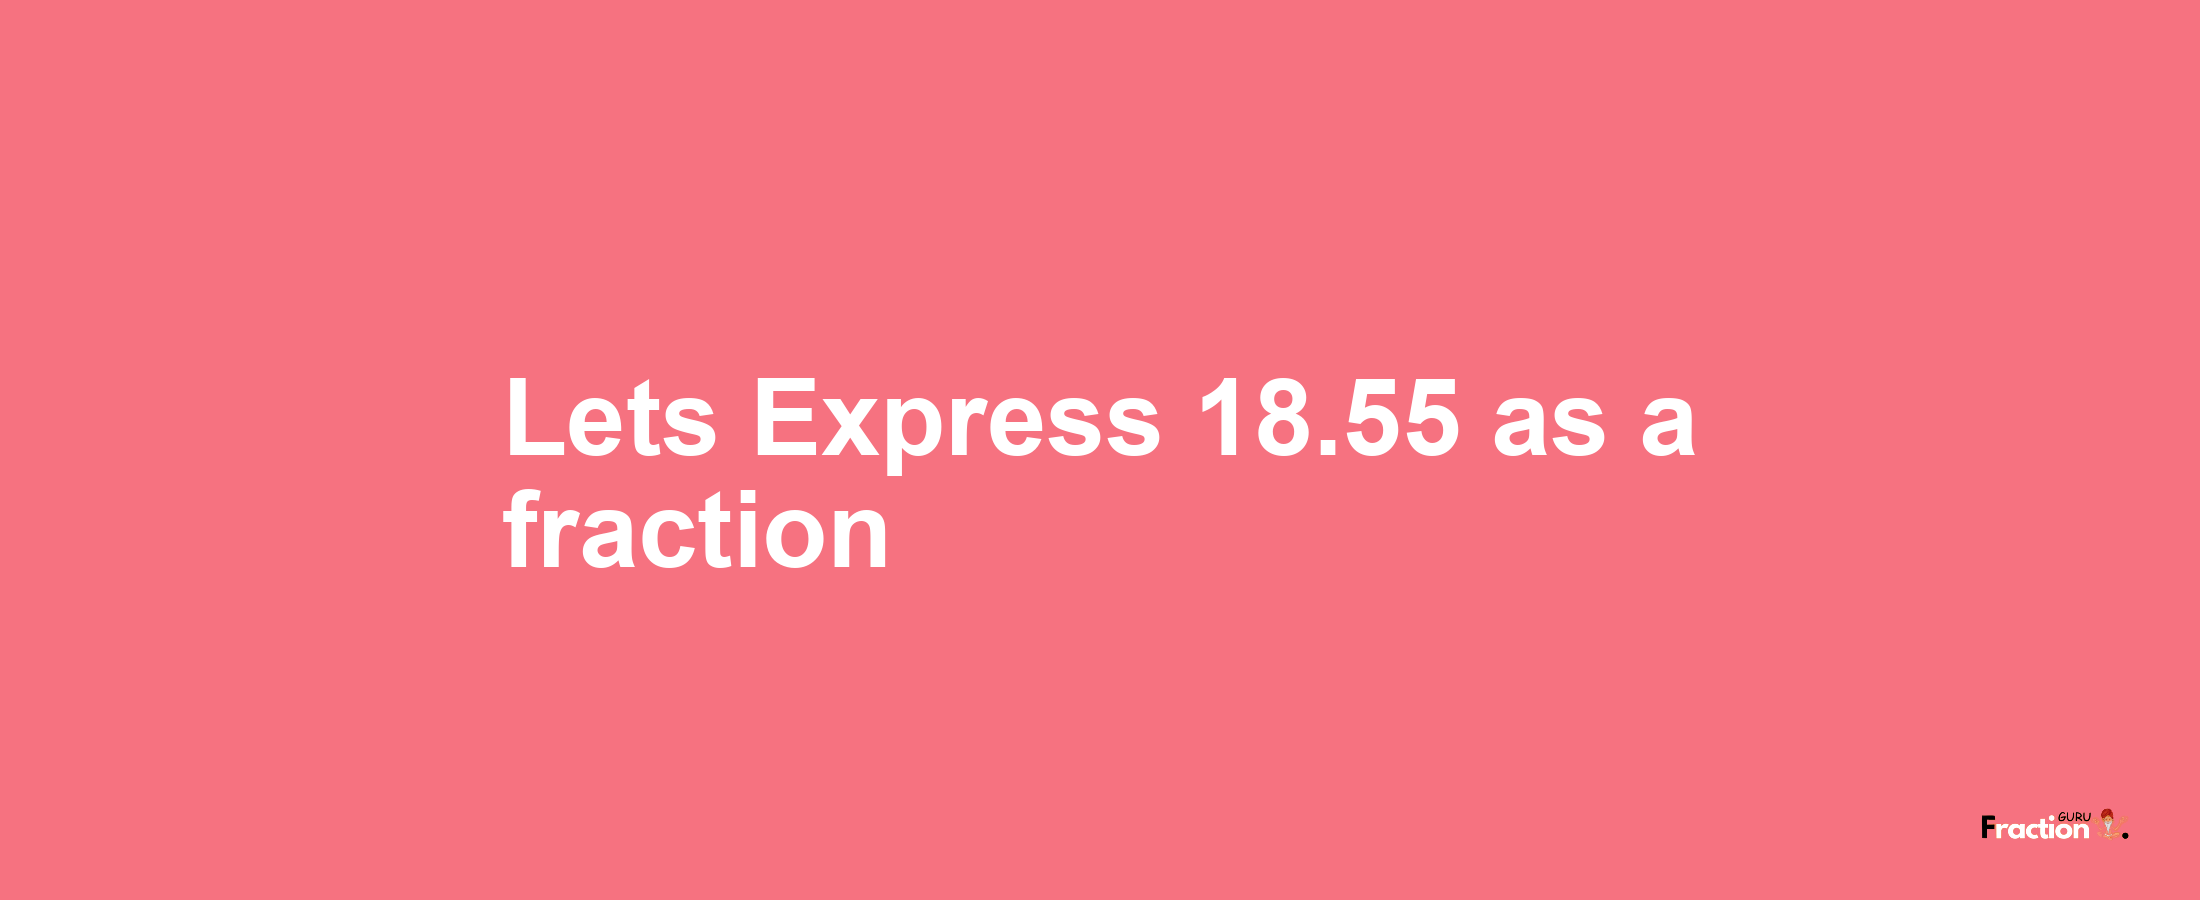 Lets Express 18.55 as afraction